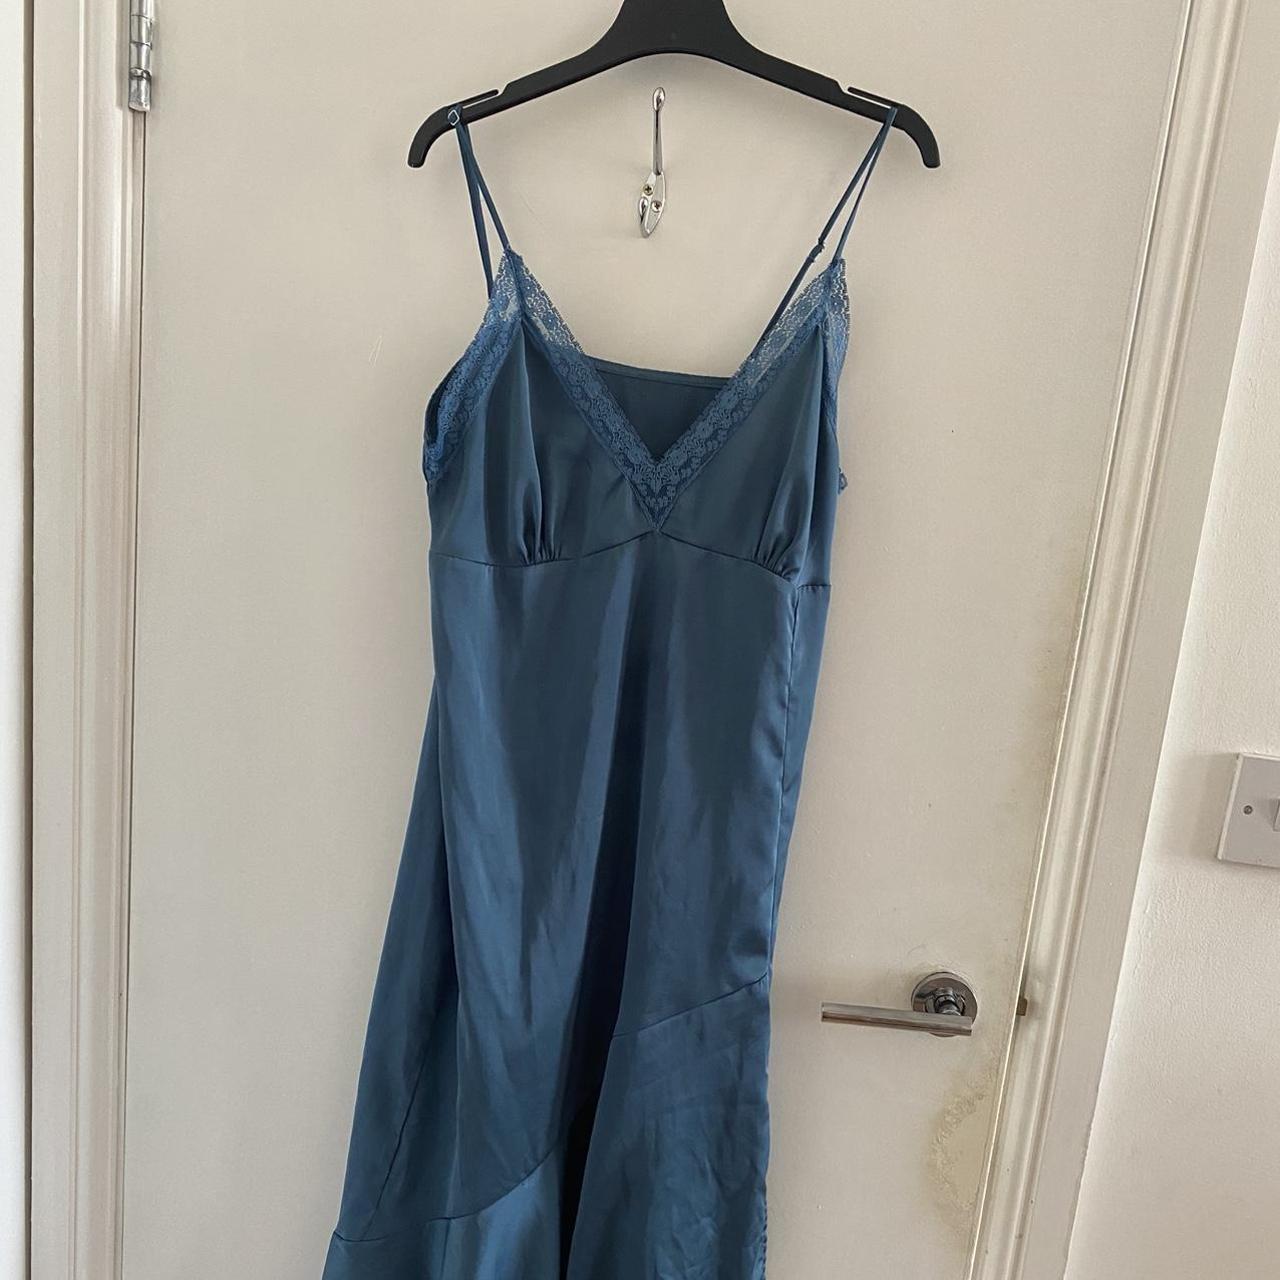 Vintage blue/turquoise silk midi dress with lace and... - Depop